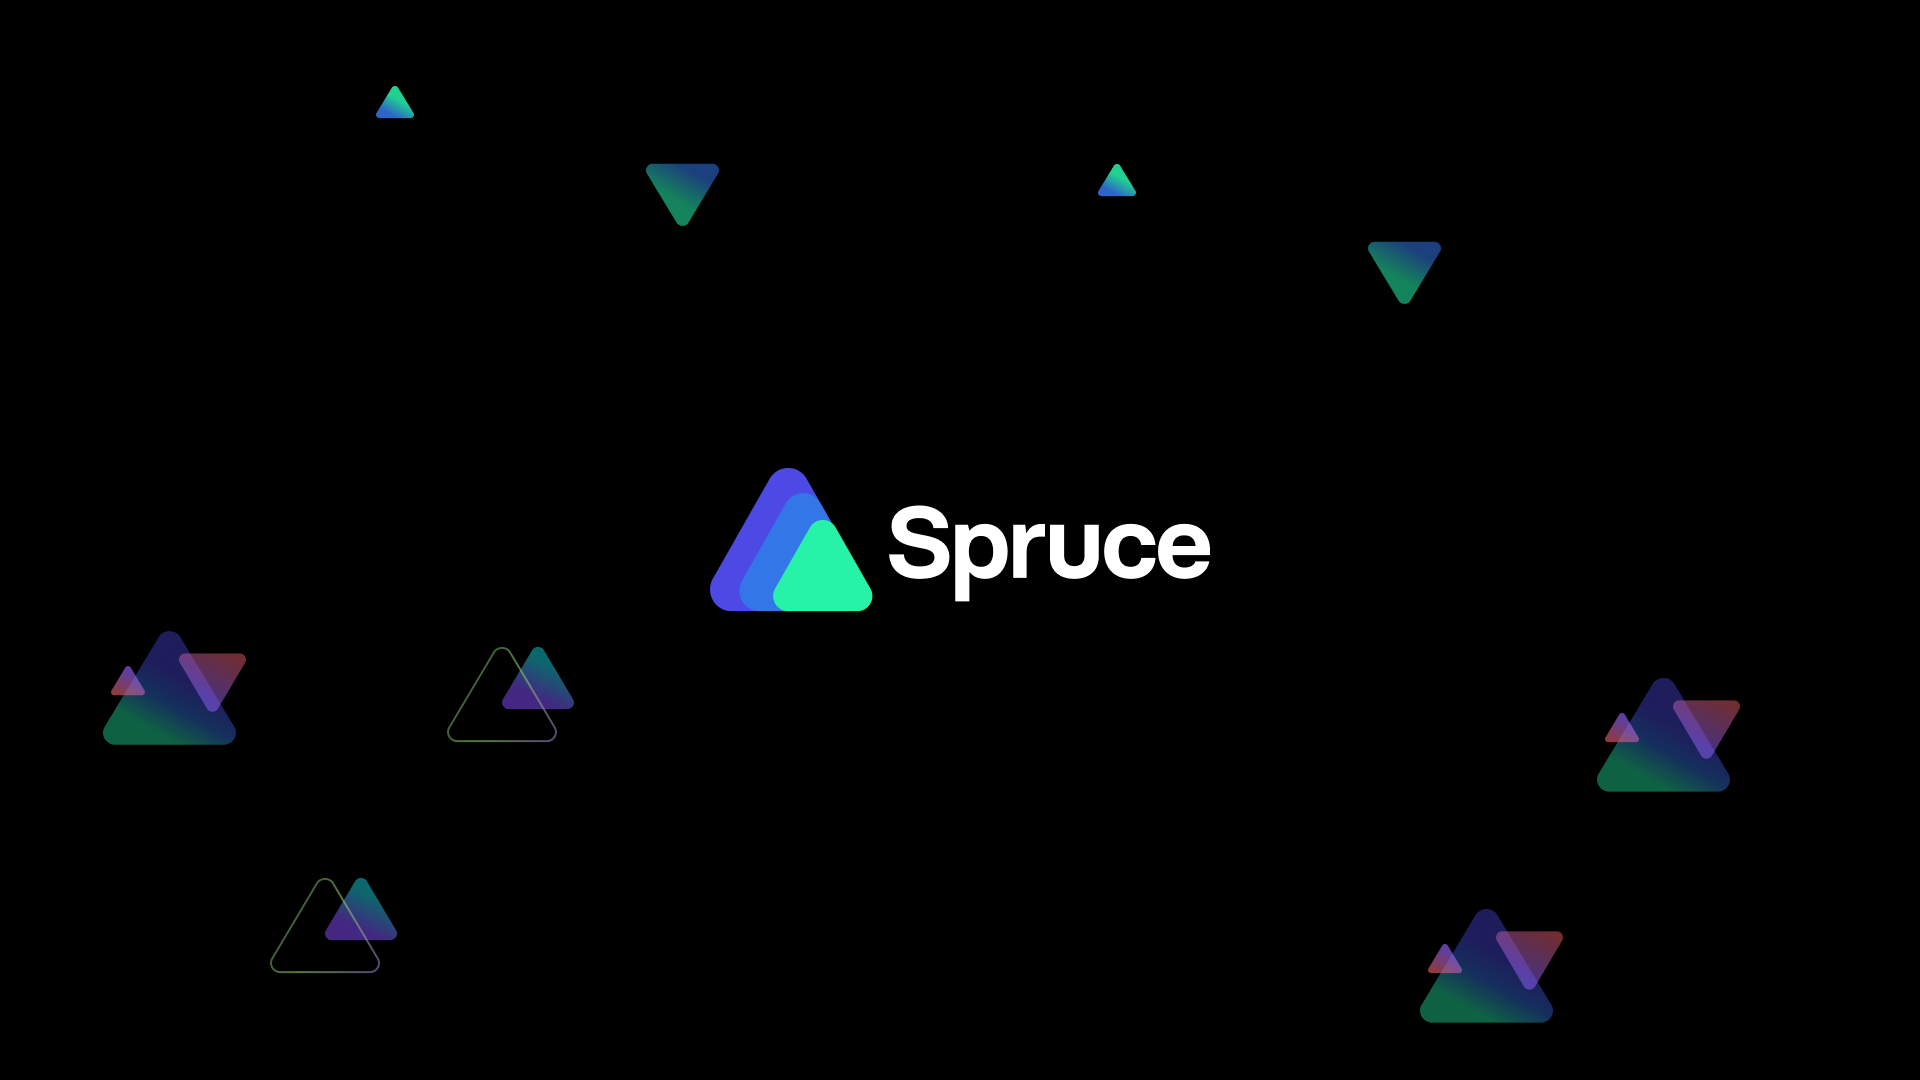 Spruce Raises $7.5 million to Scale Decentralized Identity and Storage